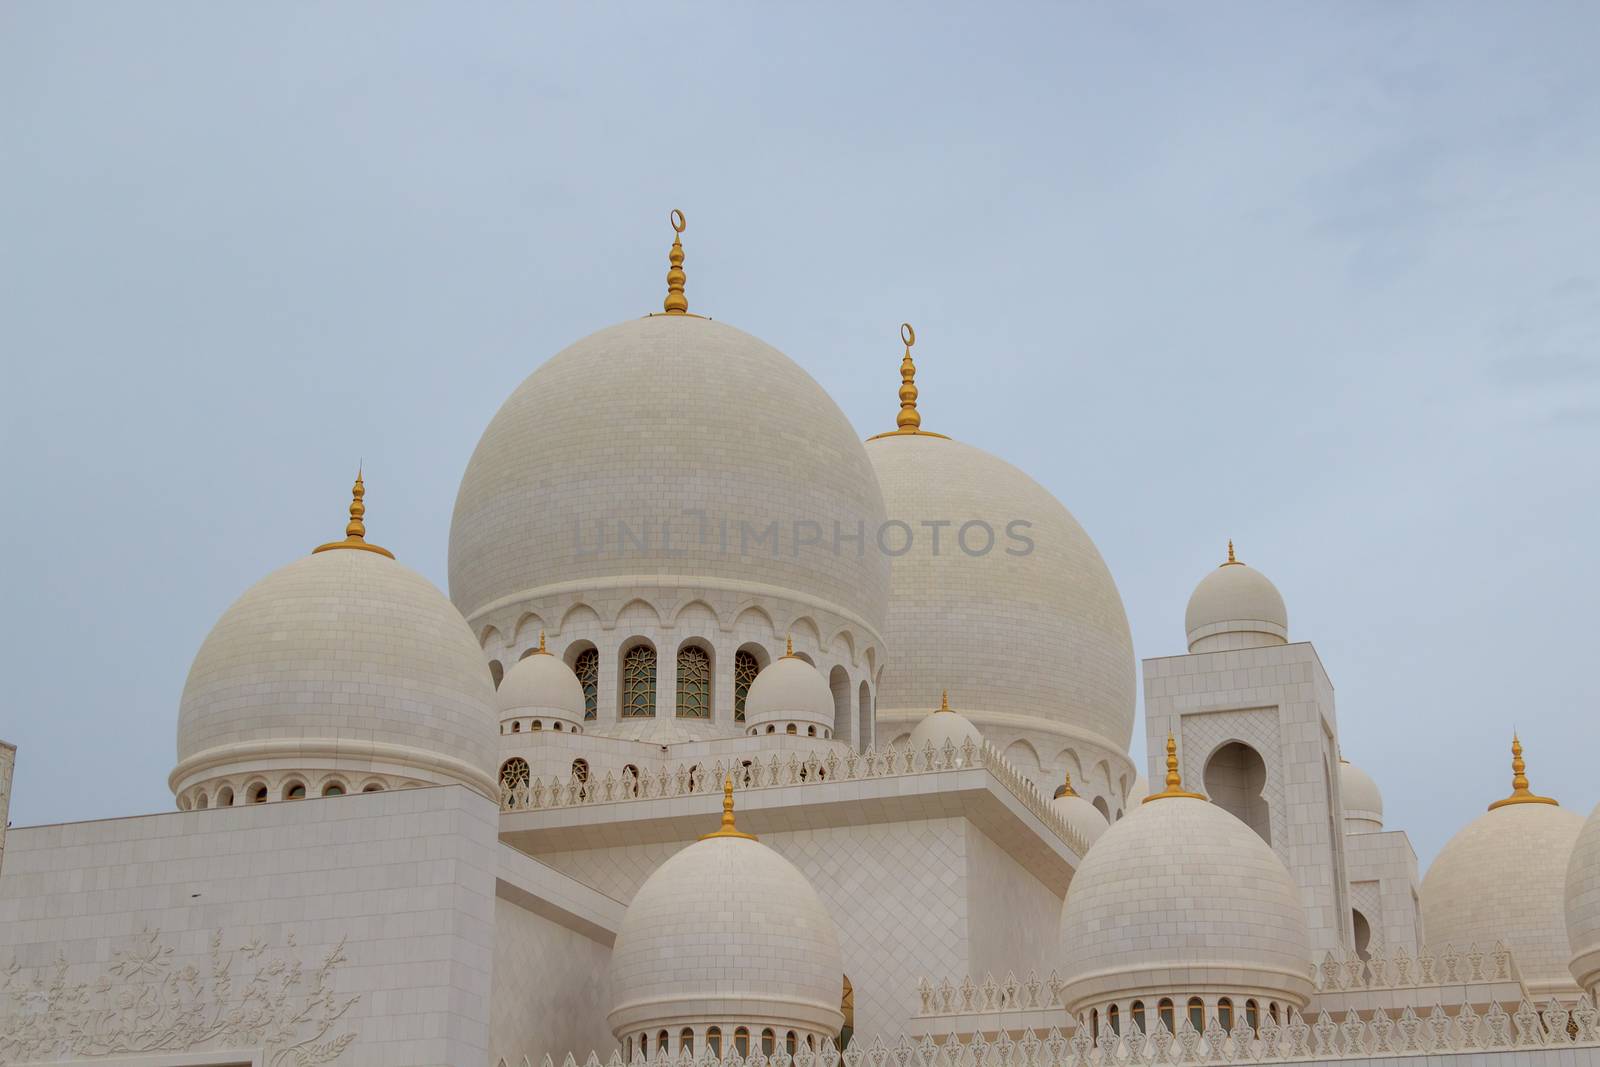 Abu Dhabi, UAE - CIRCA 2020:Sheikh Zayed Grand Mosque in Abu Dhabi, exterior view during the sunset located at the capital city of United Arab Emirates. The beautiful and largest mosque in Middle East by dugulan